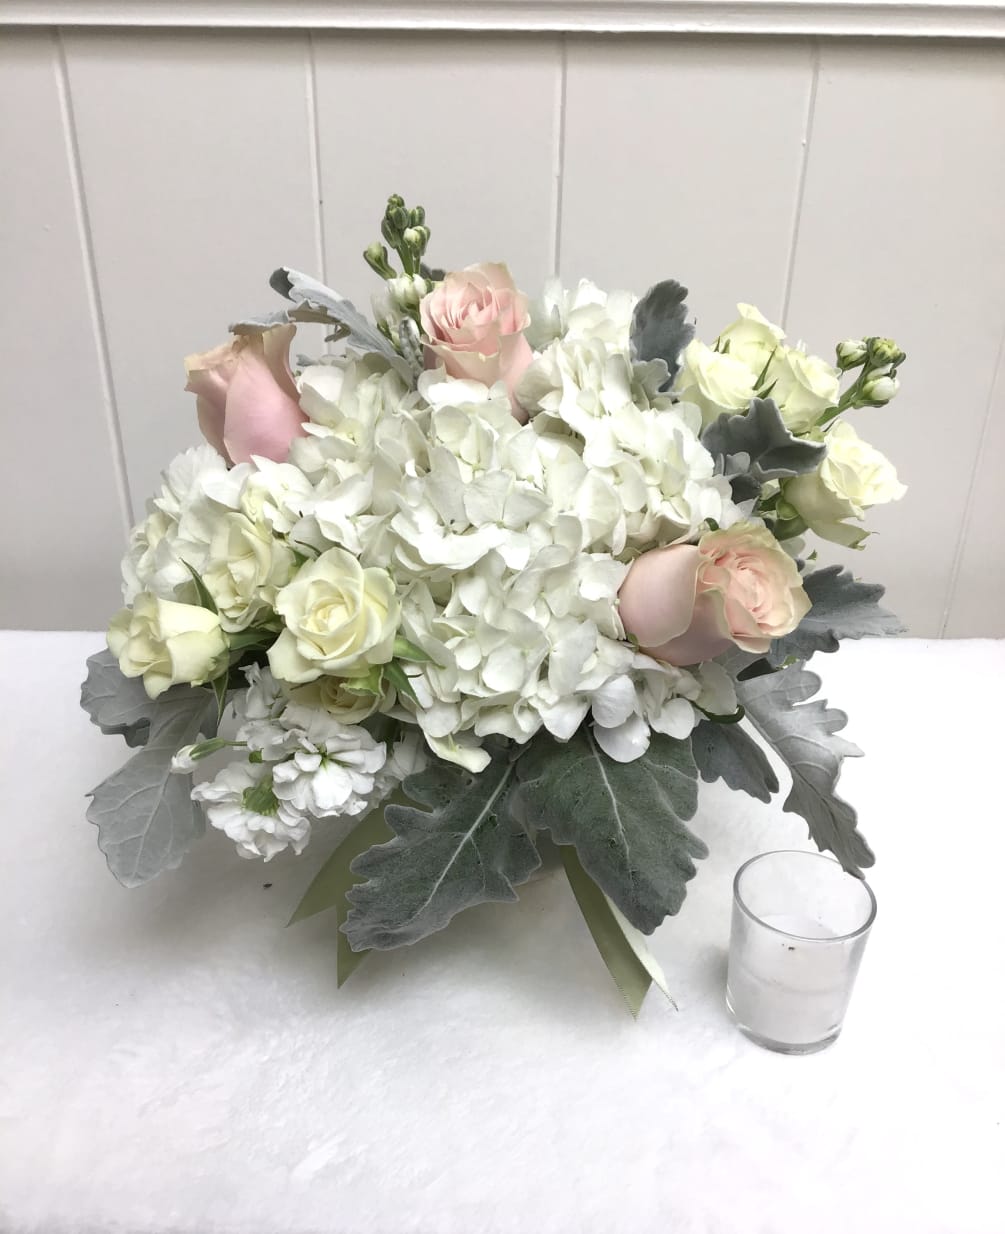 Soft, sweet, and neutral colors make this the perfect choice to send